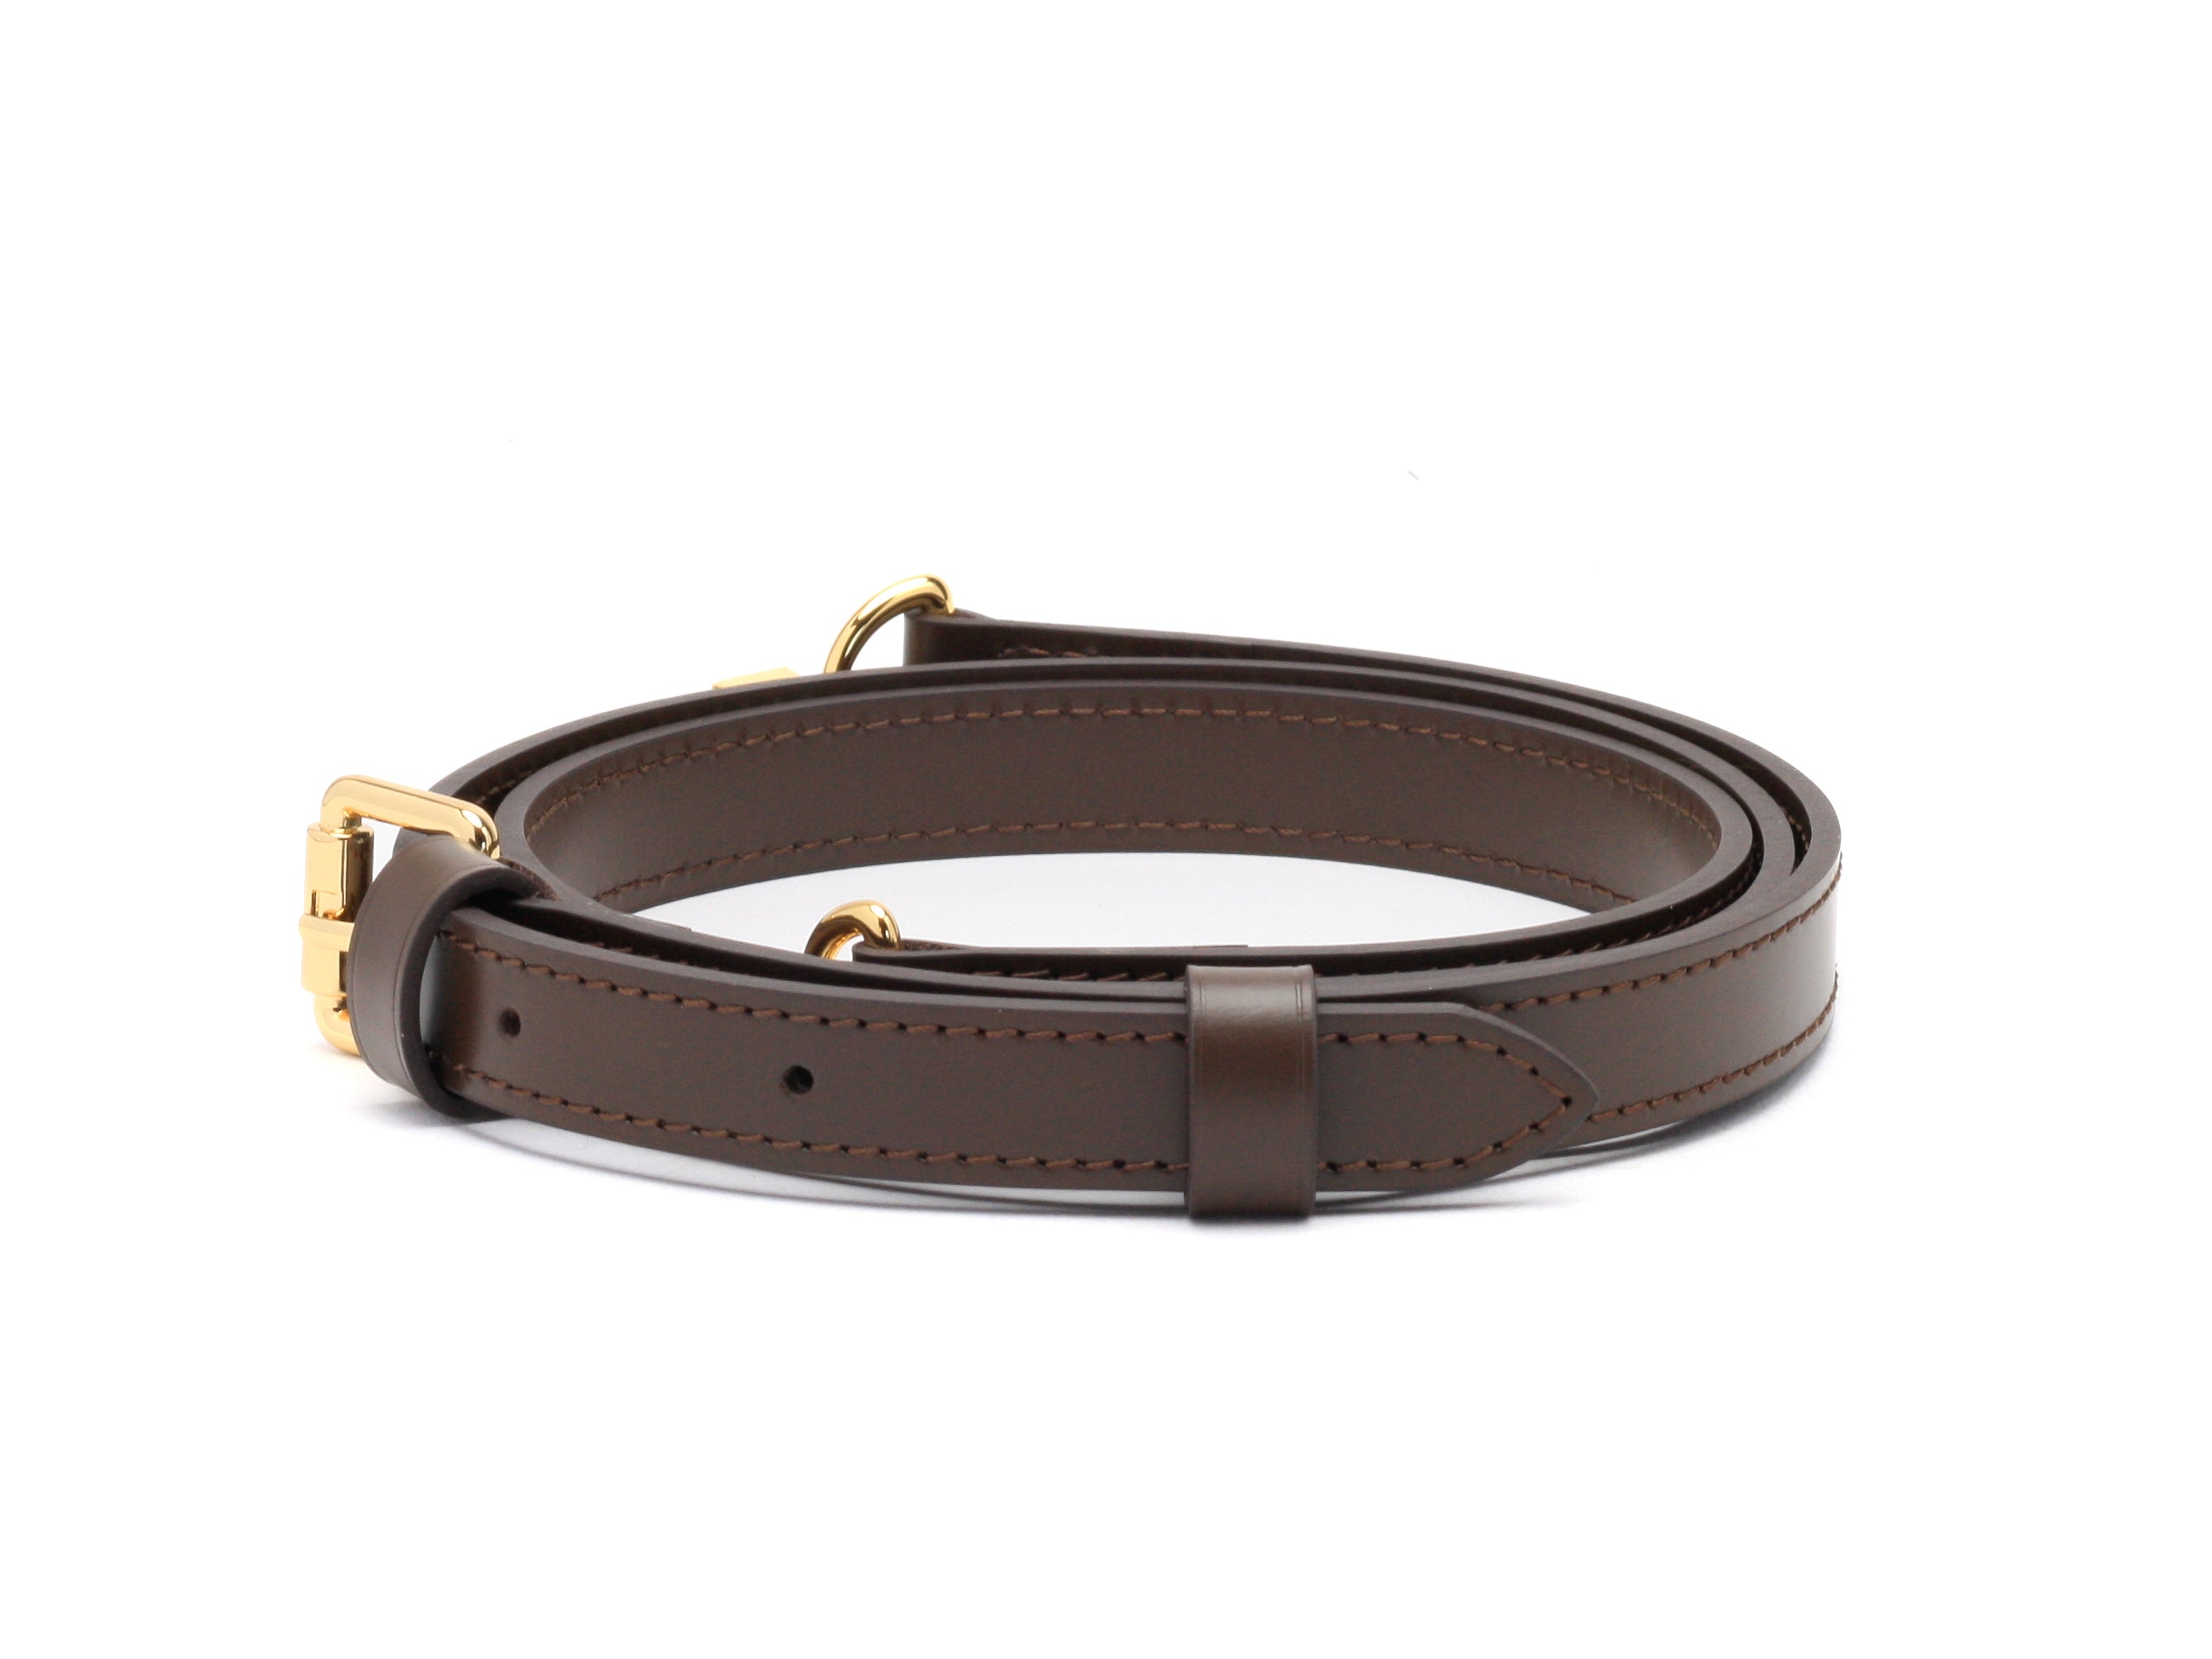 Speedy 25 / 30 Adjustable Dark Brown /beige Vachetta Leather Strap  Replacement With Gold Clasps 18mm/0.7 Inch Wide 122cm/48 Inches Long 